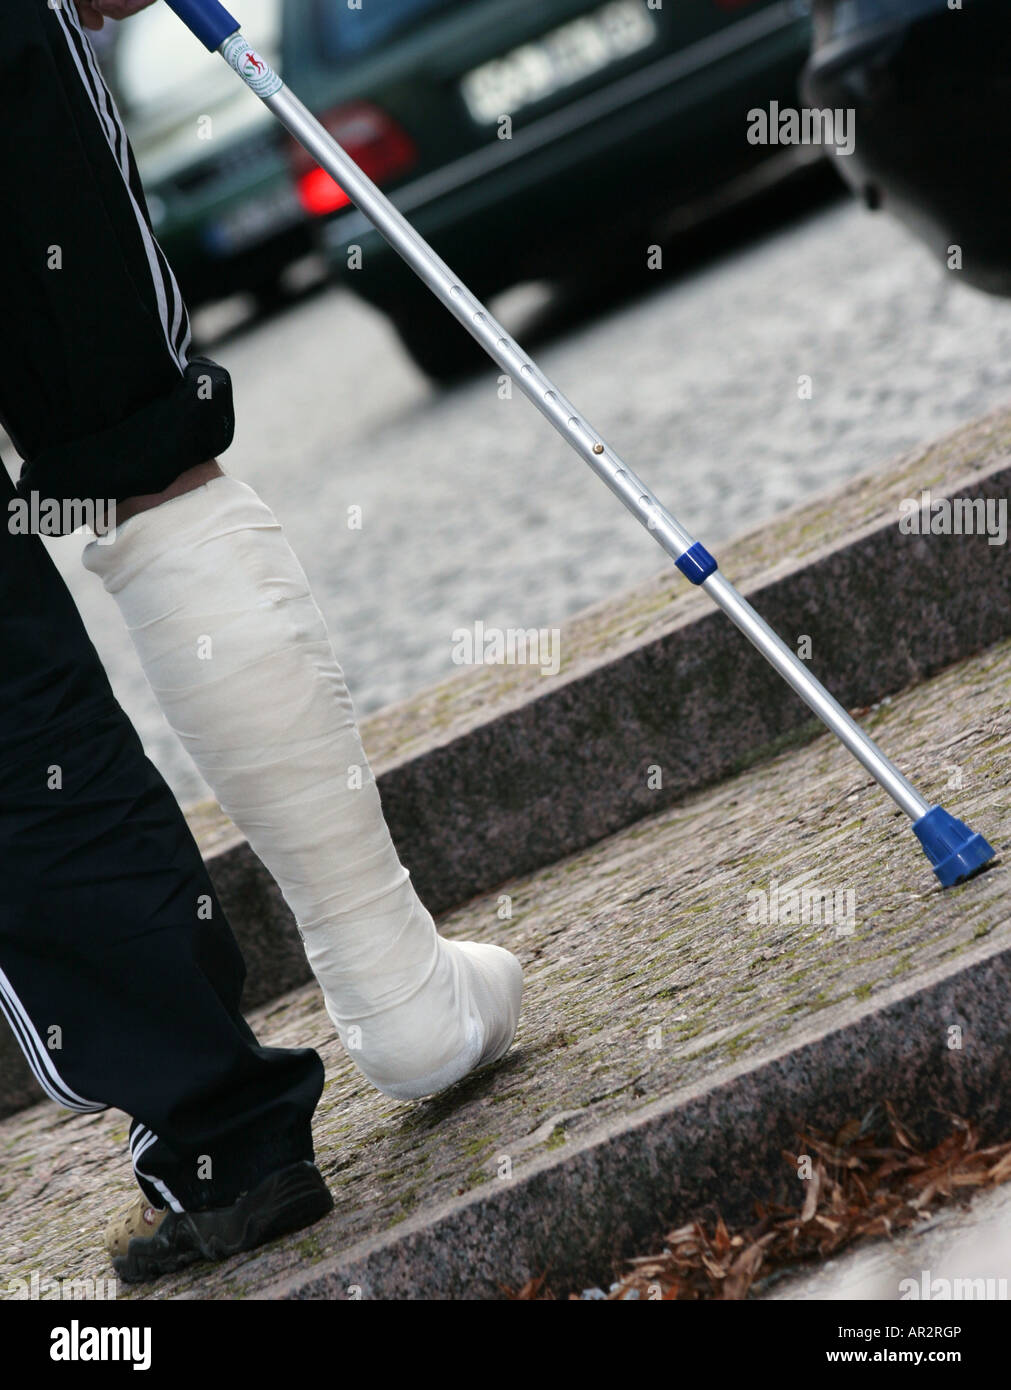 Stepping out. an young man with one leg walking on crutches in a